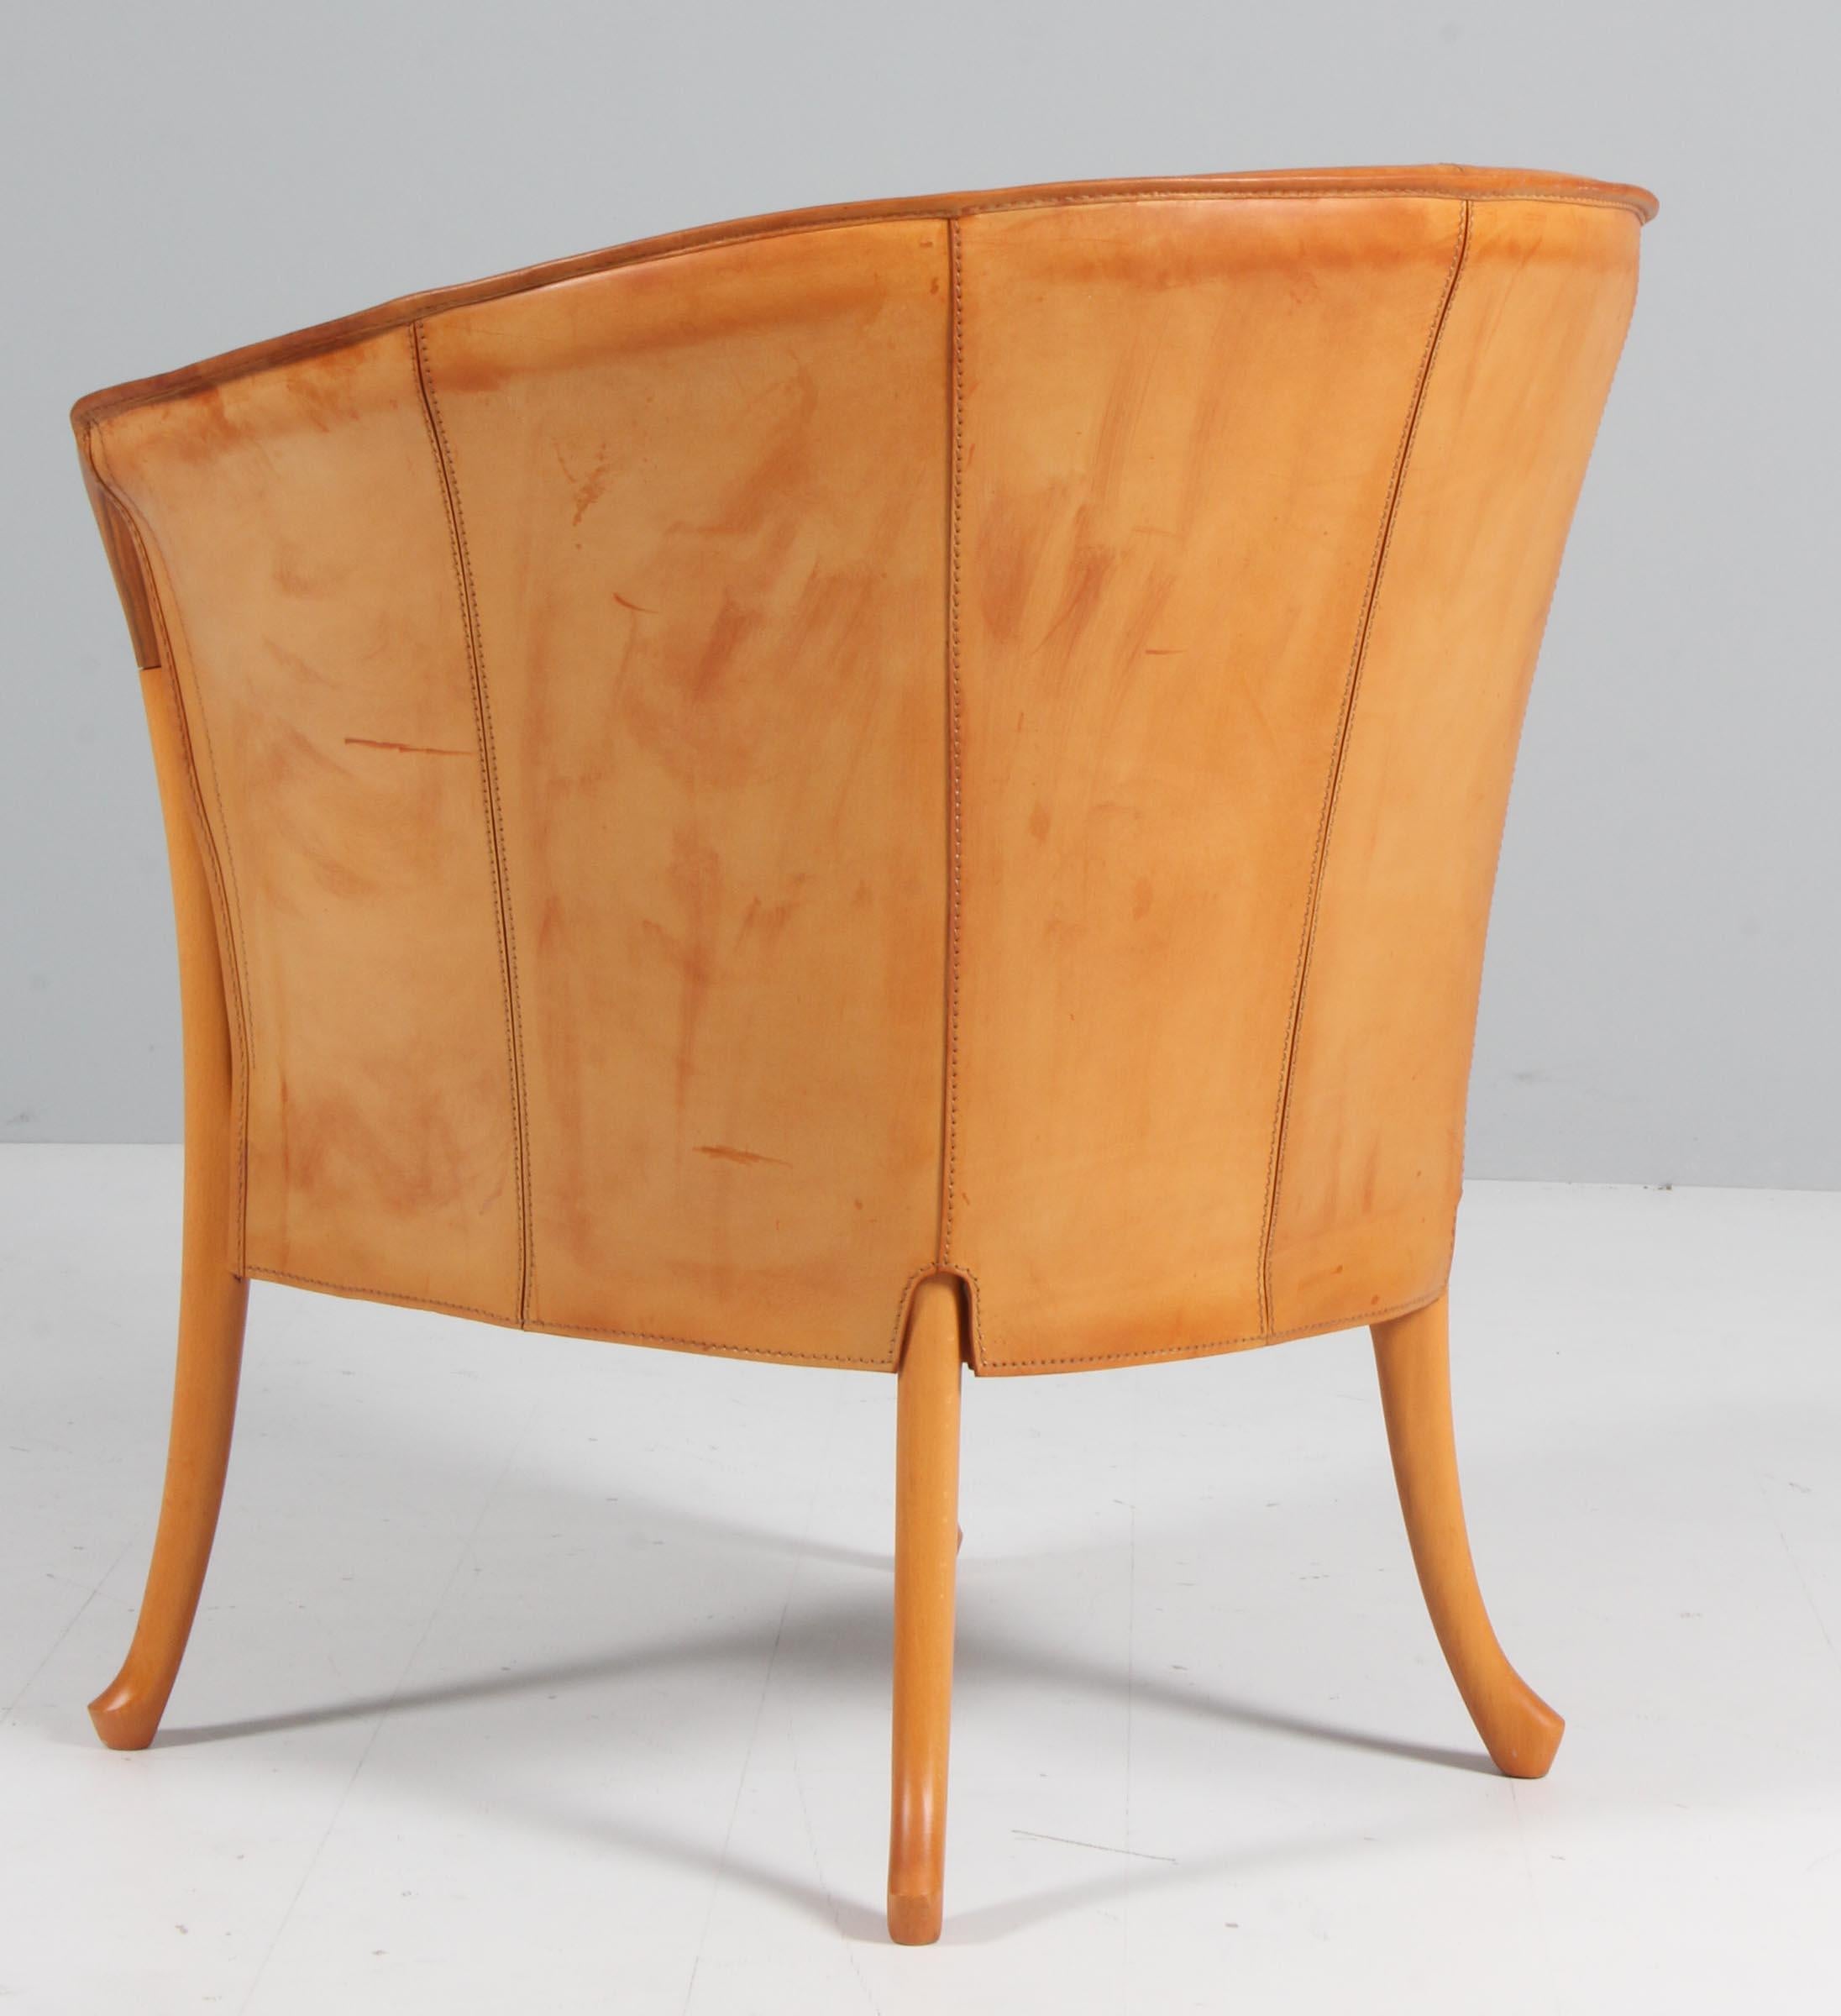 Umberto Asnago for Giorgetti lounge chair in saddle leather 1